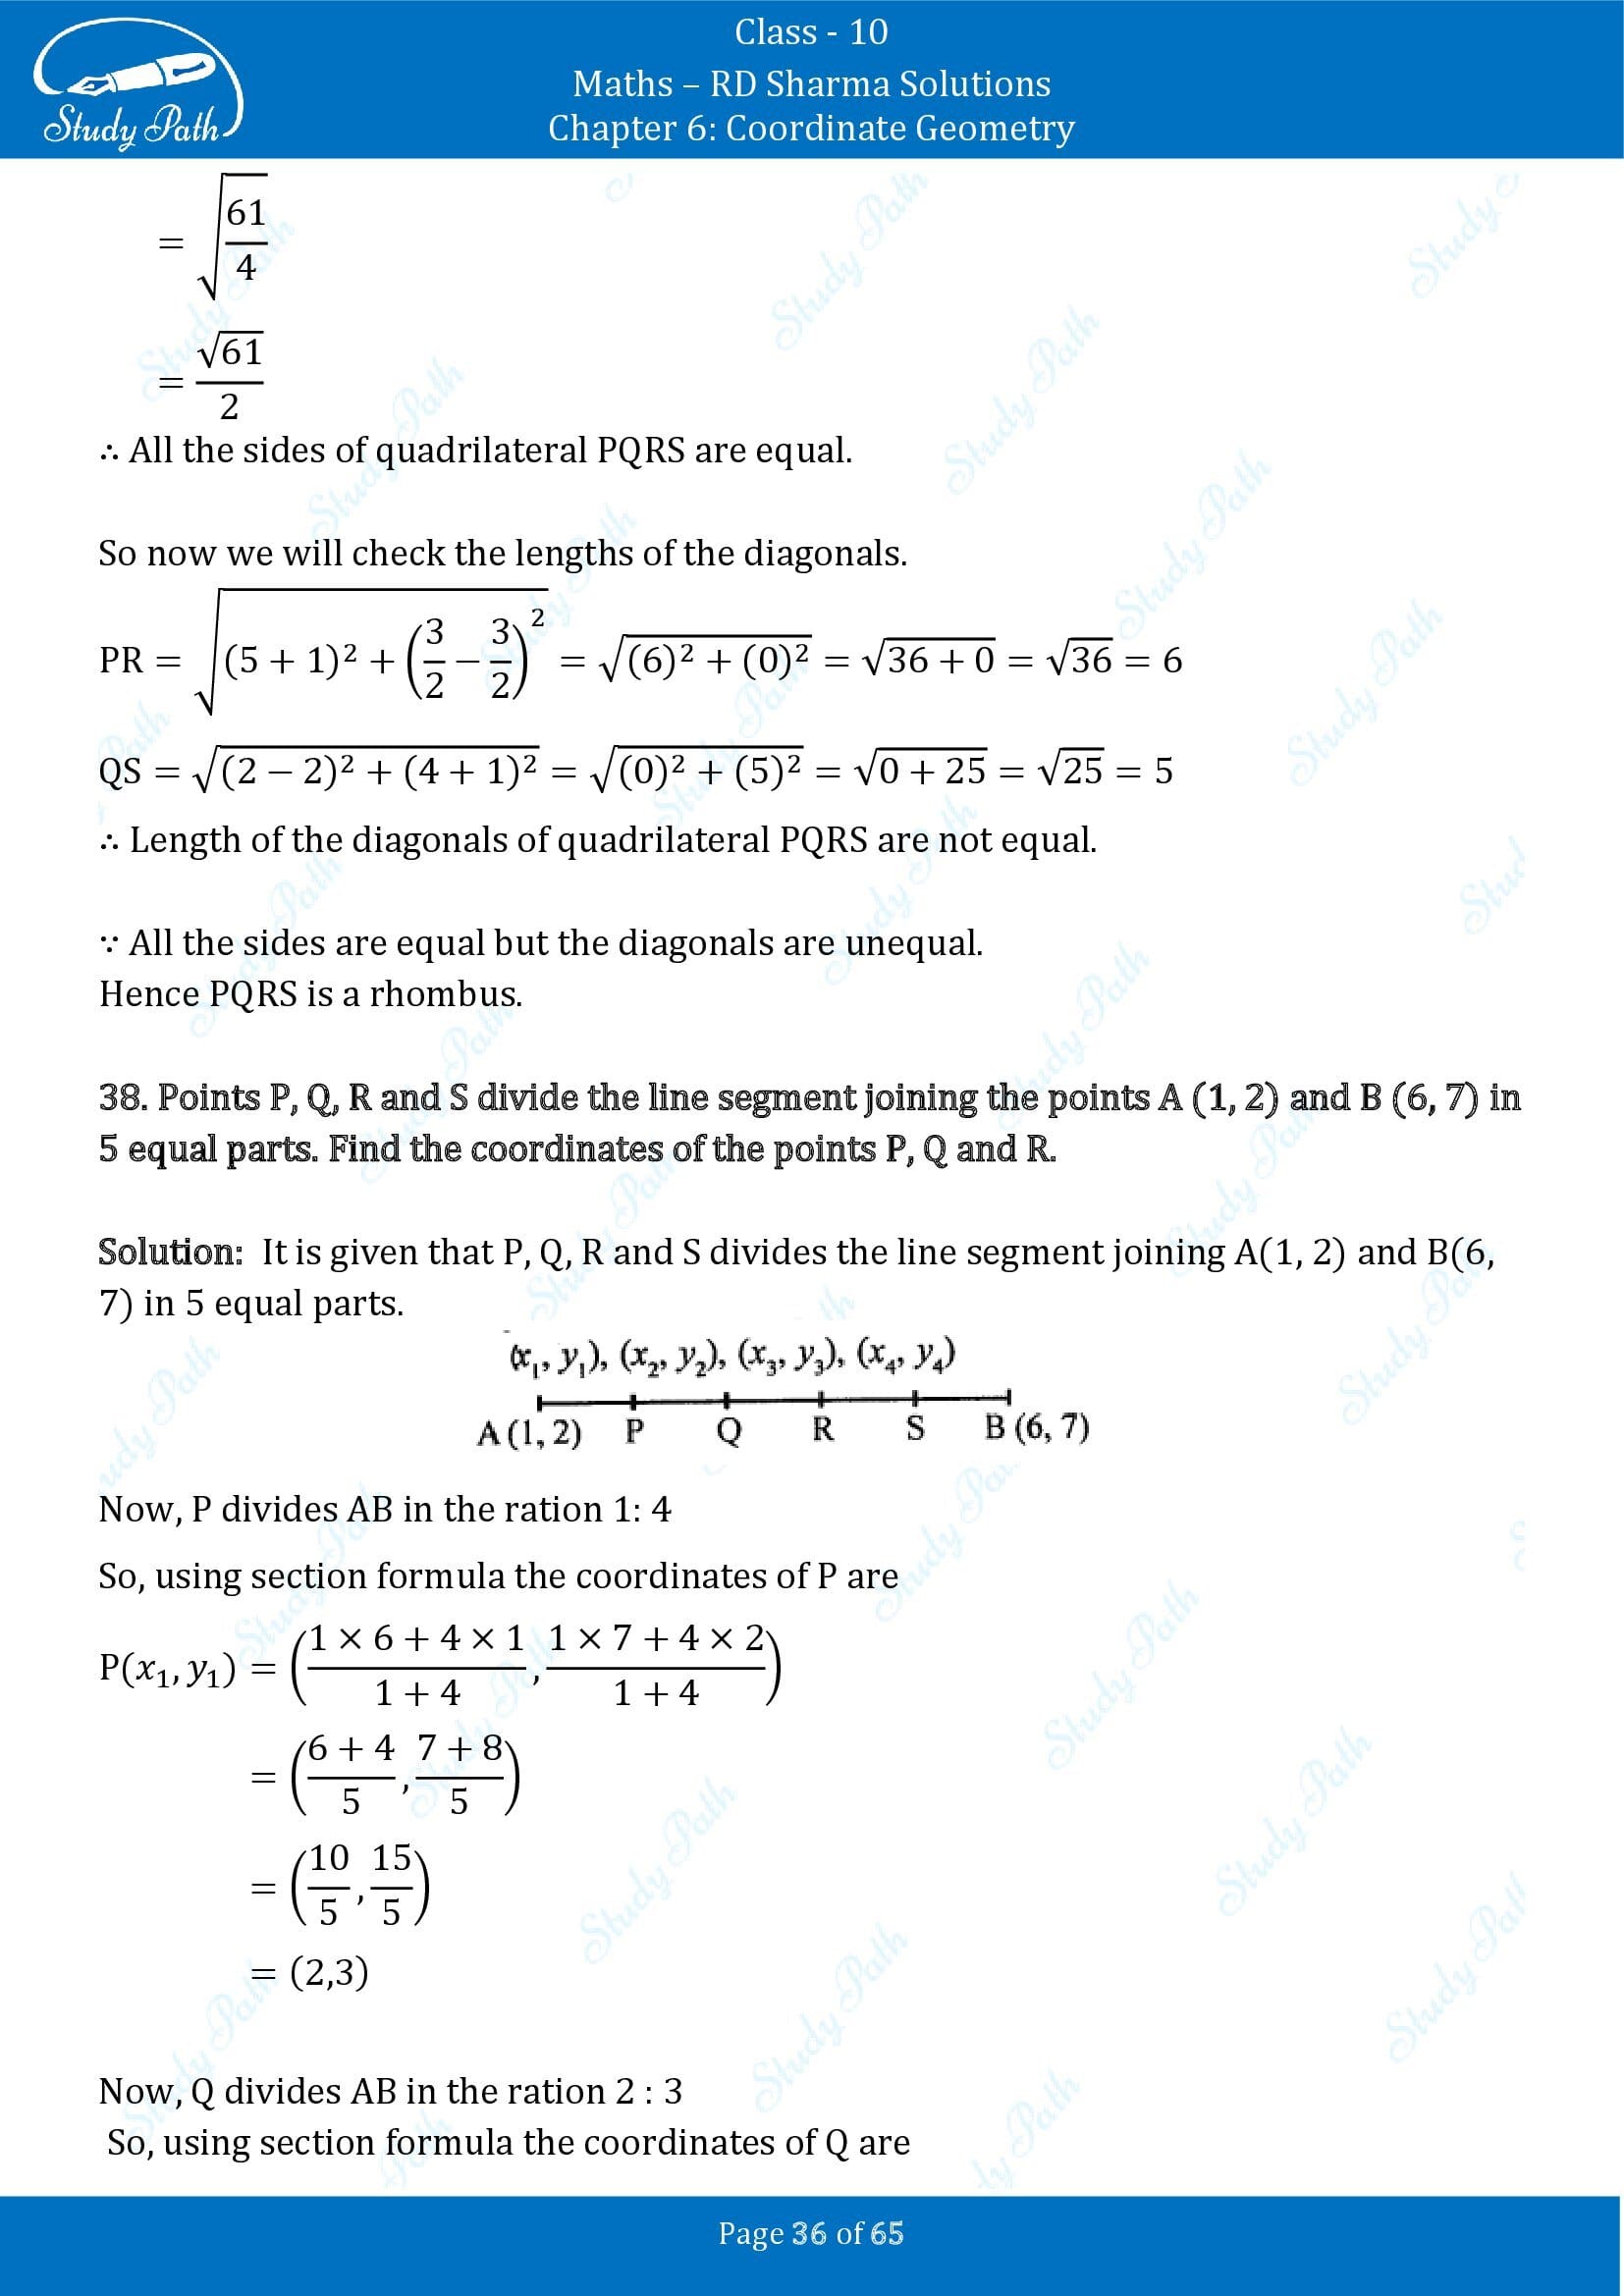 RD Sharma Solutions Class 10 Chapter 6 Coordinate Geometry Exercise 6.3 00036